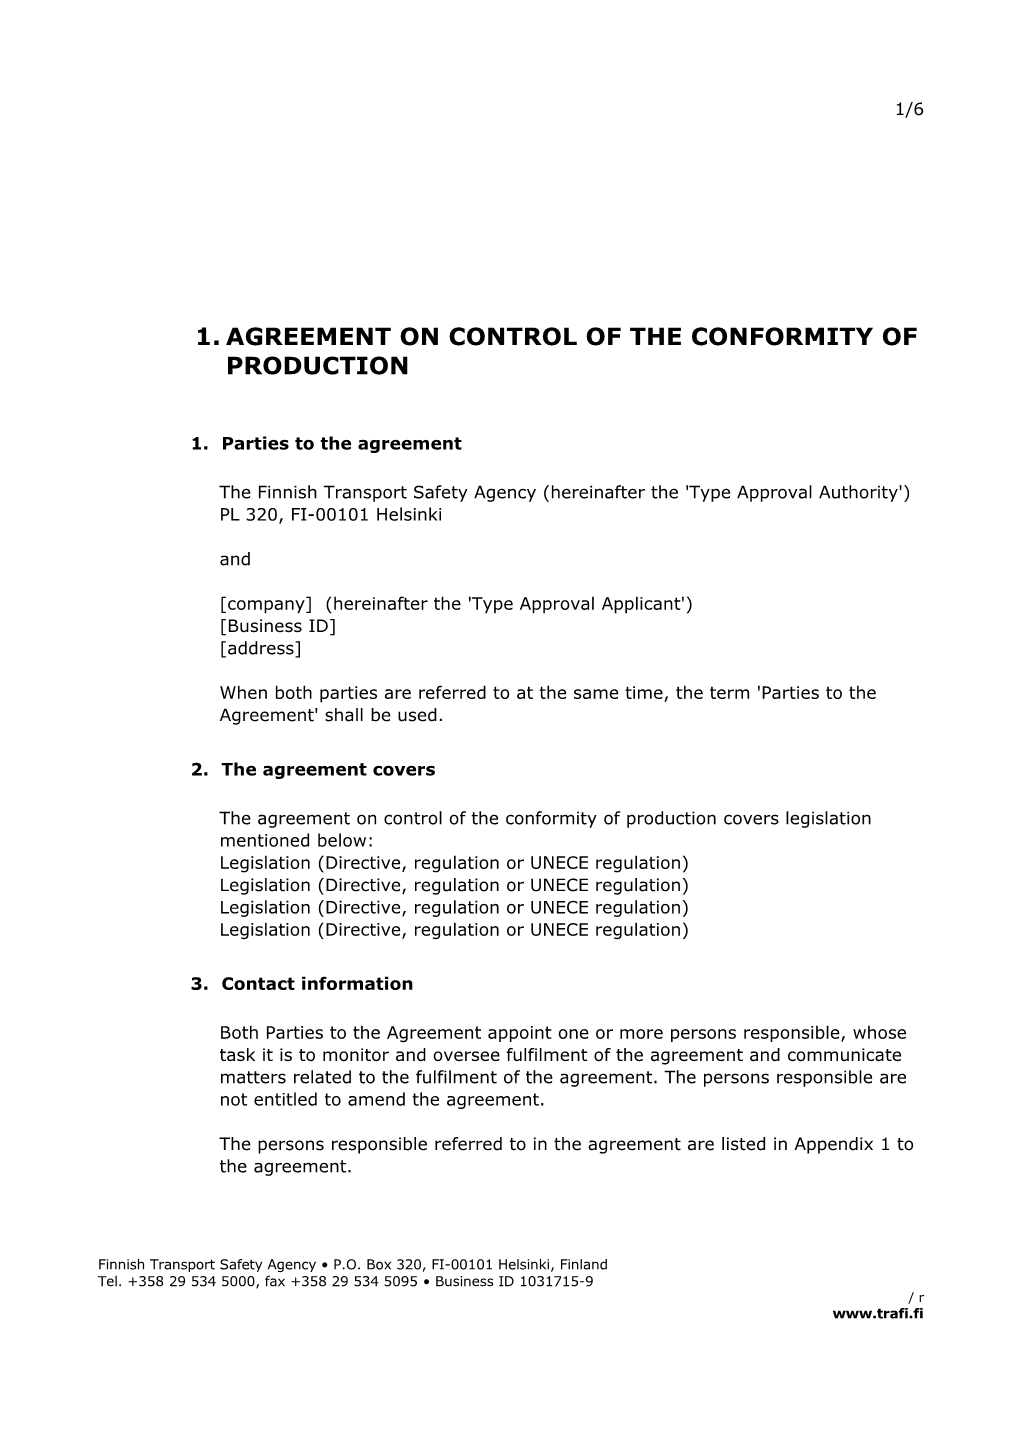 Agreement on Control of the Conformity of Production